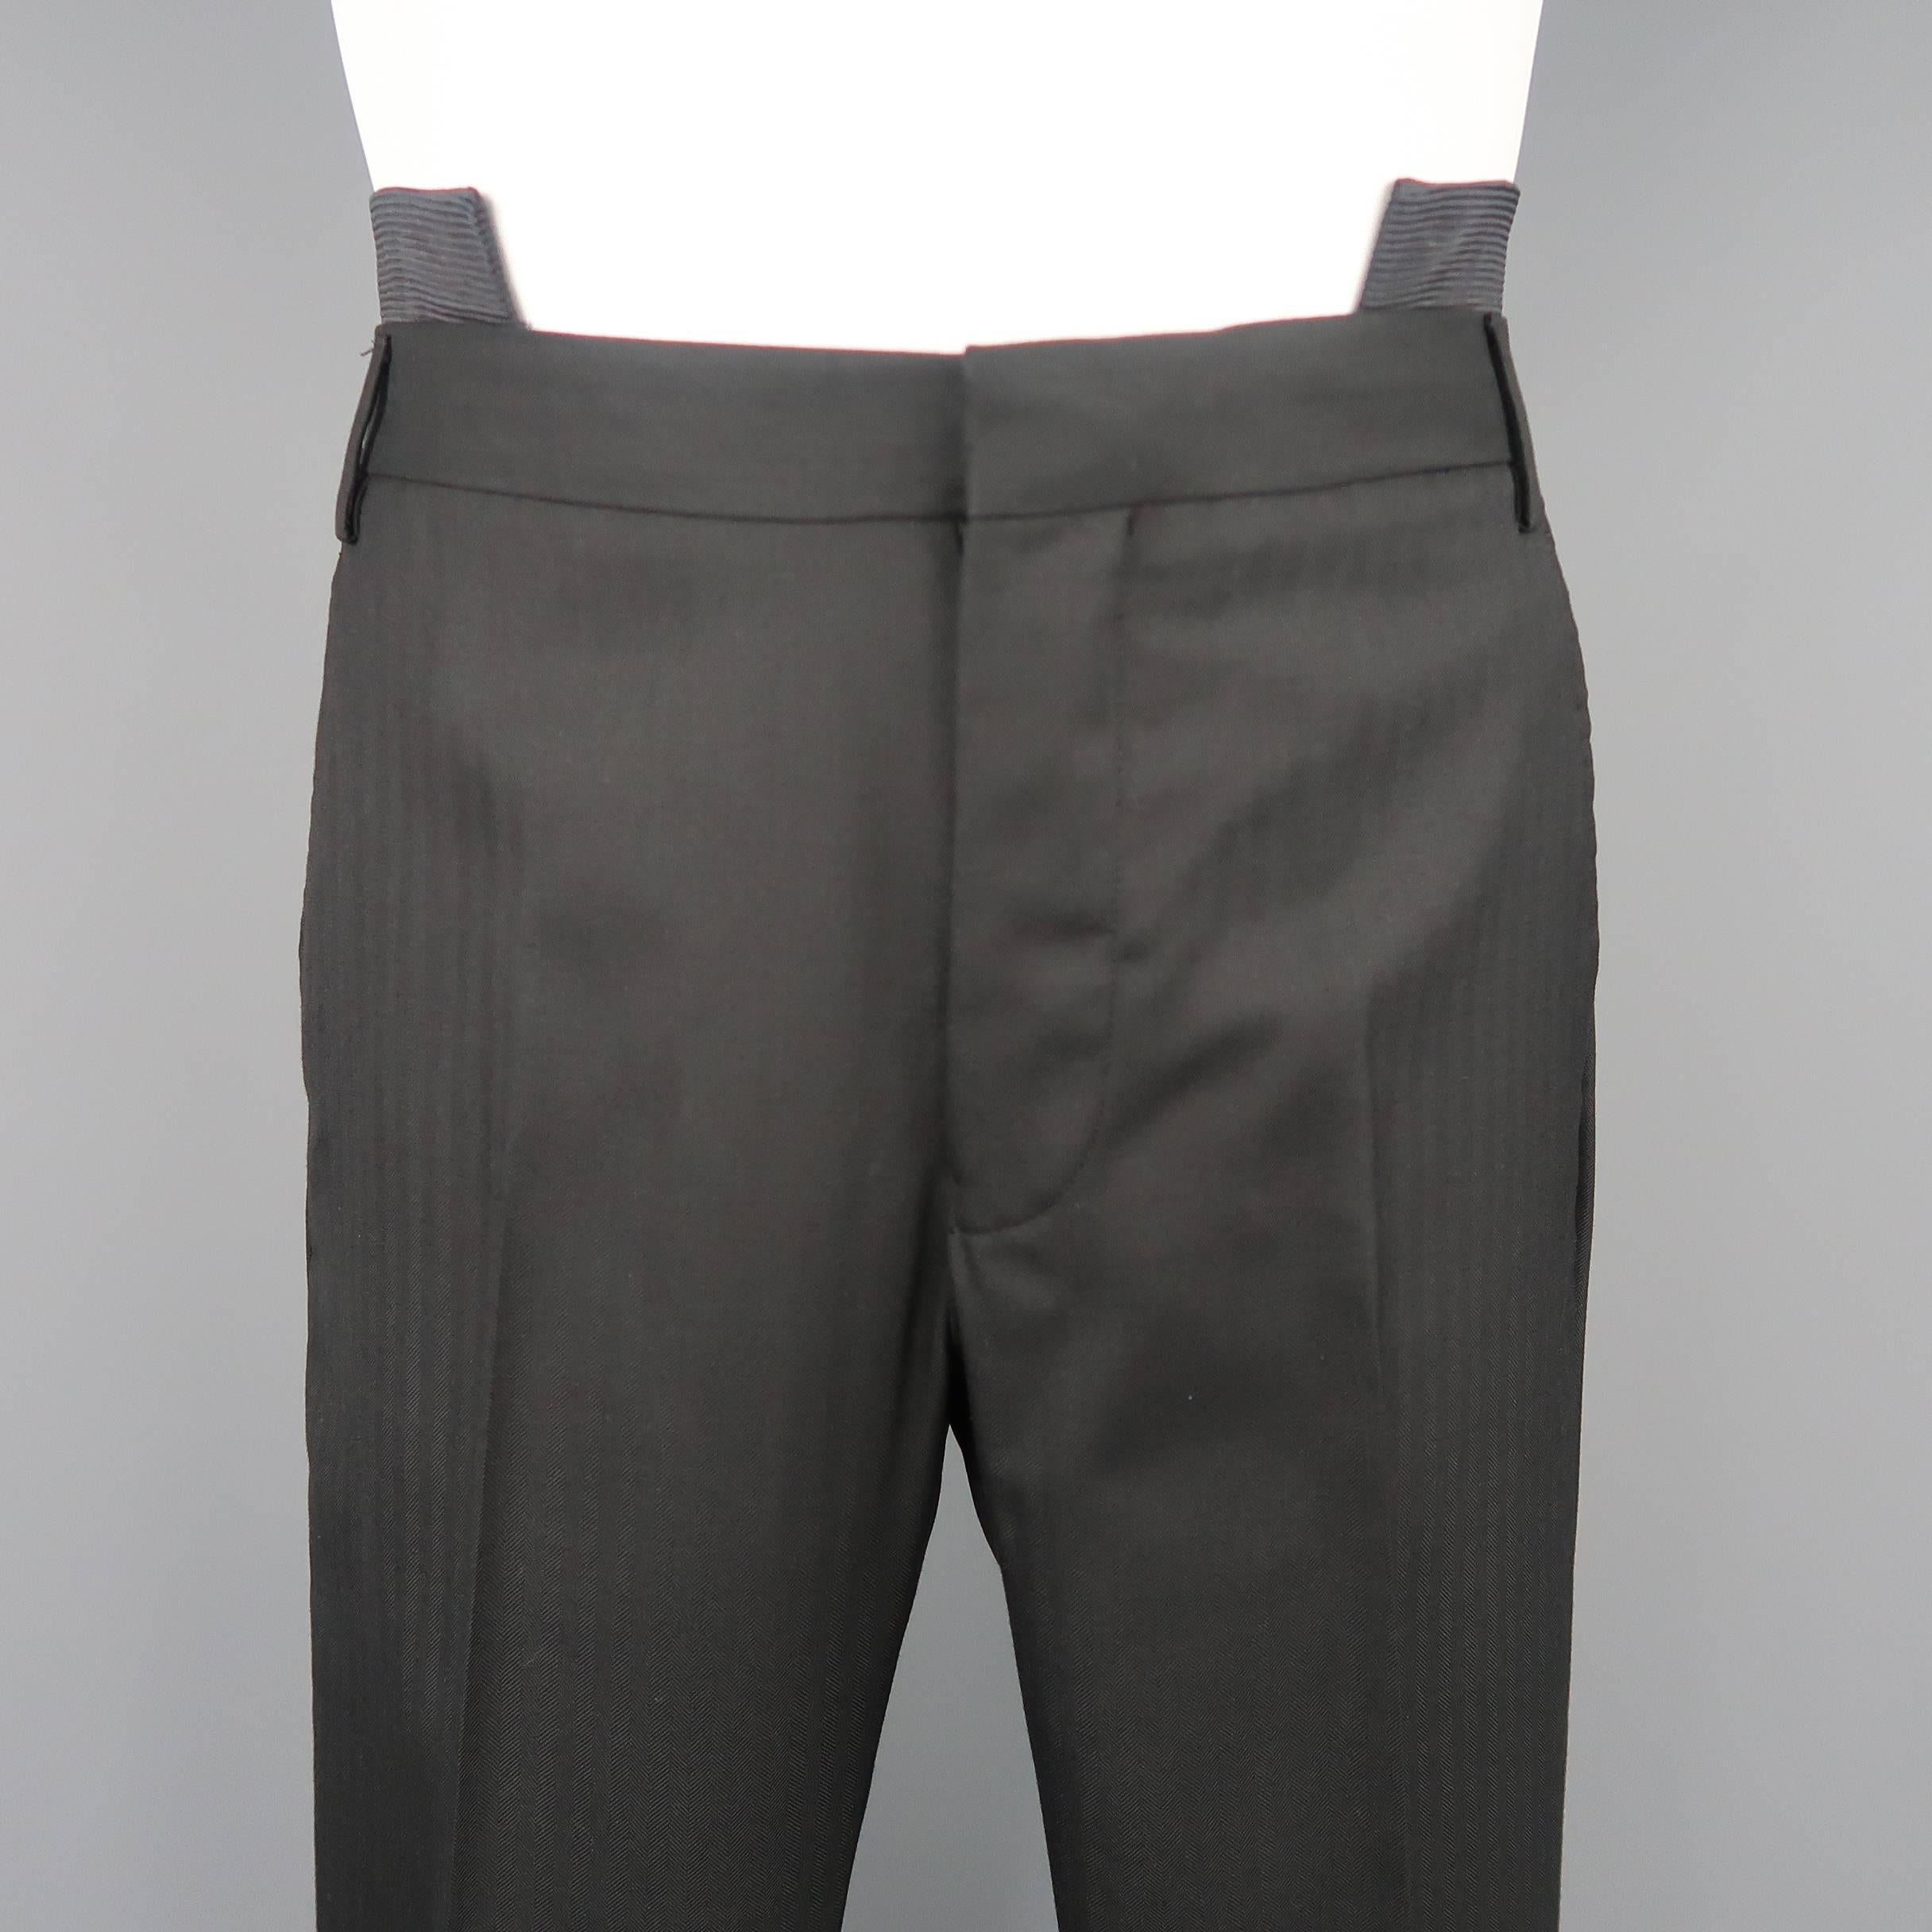 GIVENCHY by RICCARDO TISCI dress pants come in black herringbone textured wool with a slim leg, covered back buttons, and iconic Tisci double stacked cutout waistband. Featured in the Fall Winter 2010 campaign. Altered waist. See detail shots.